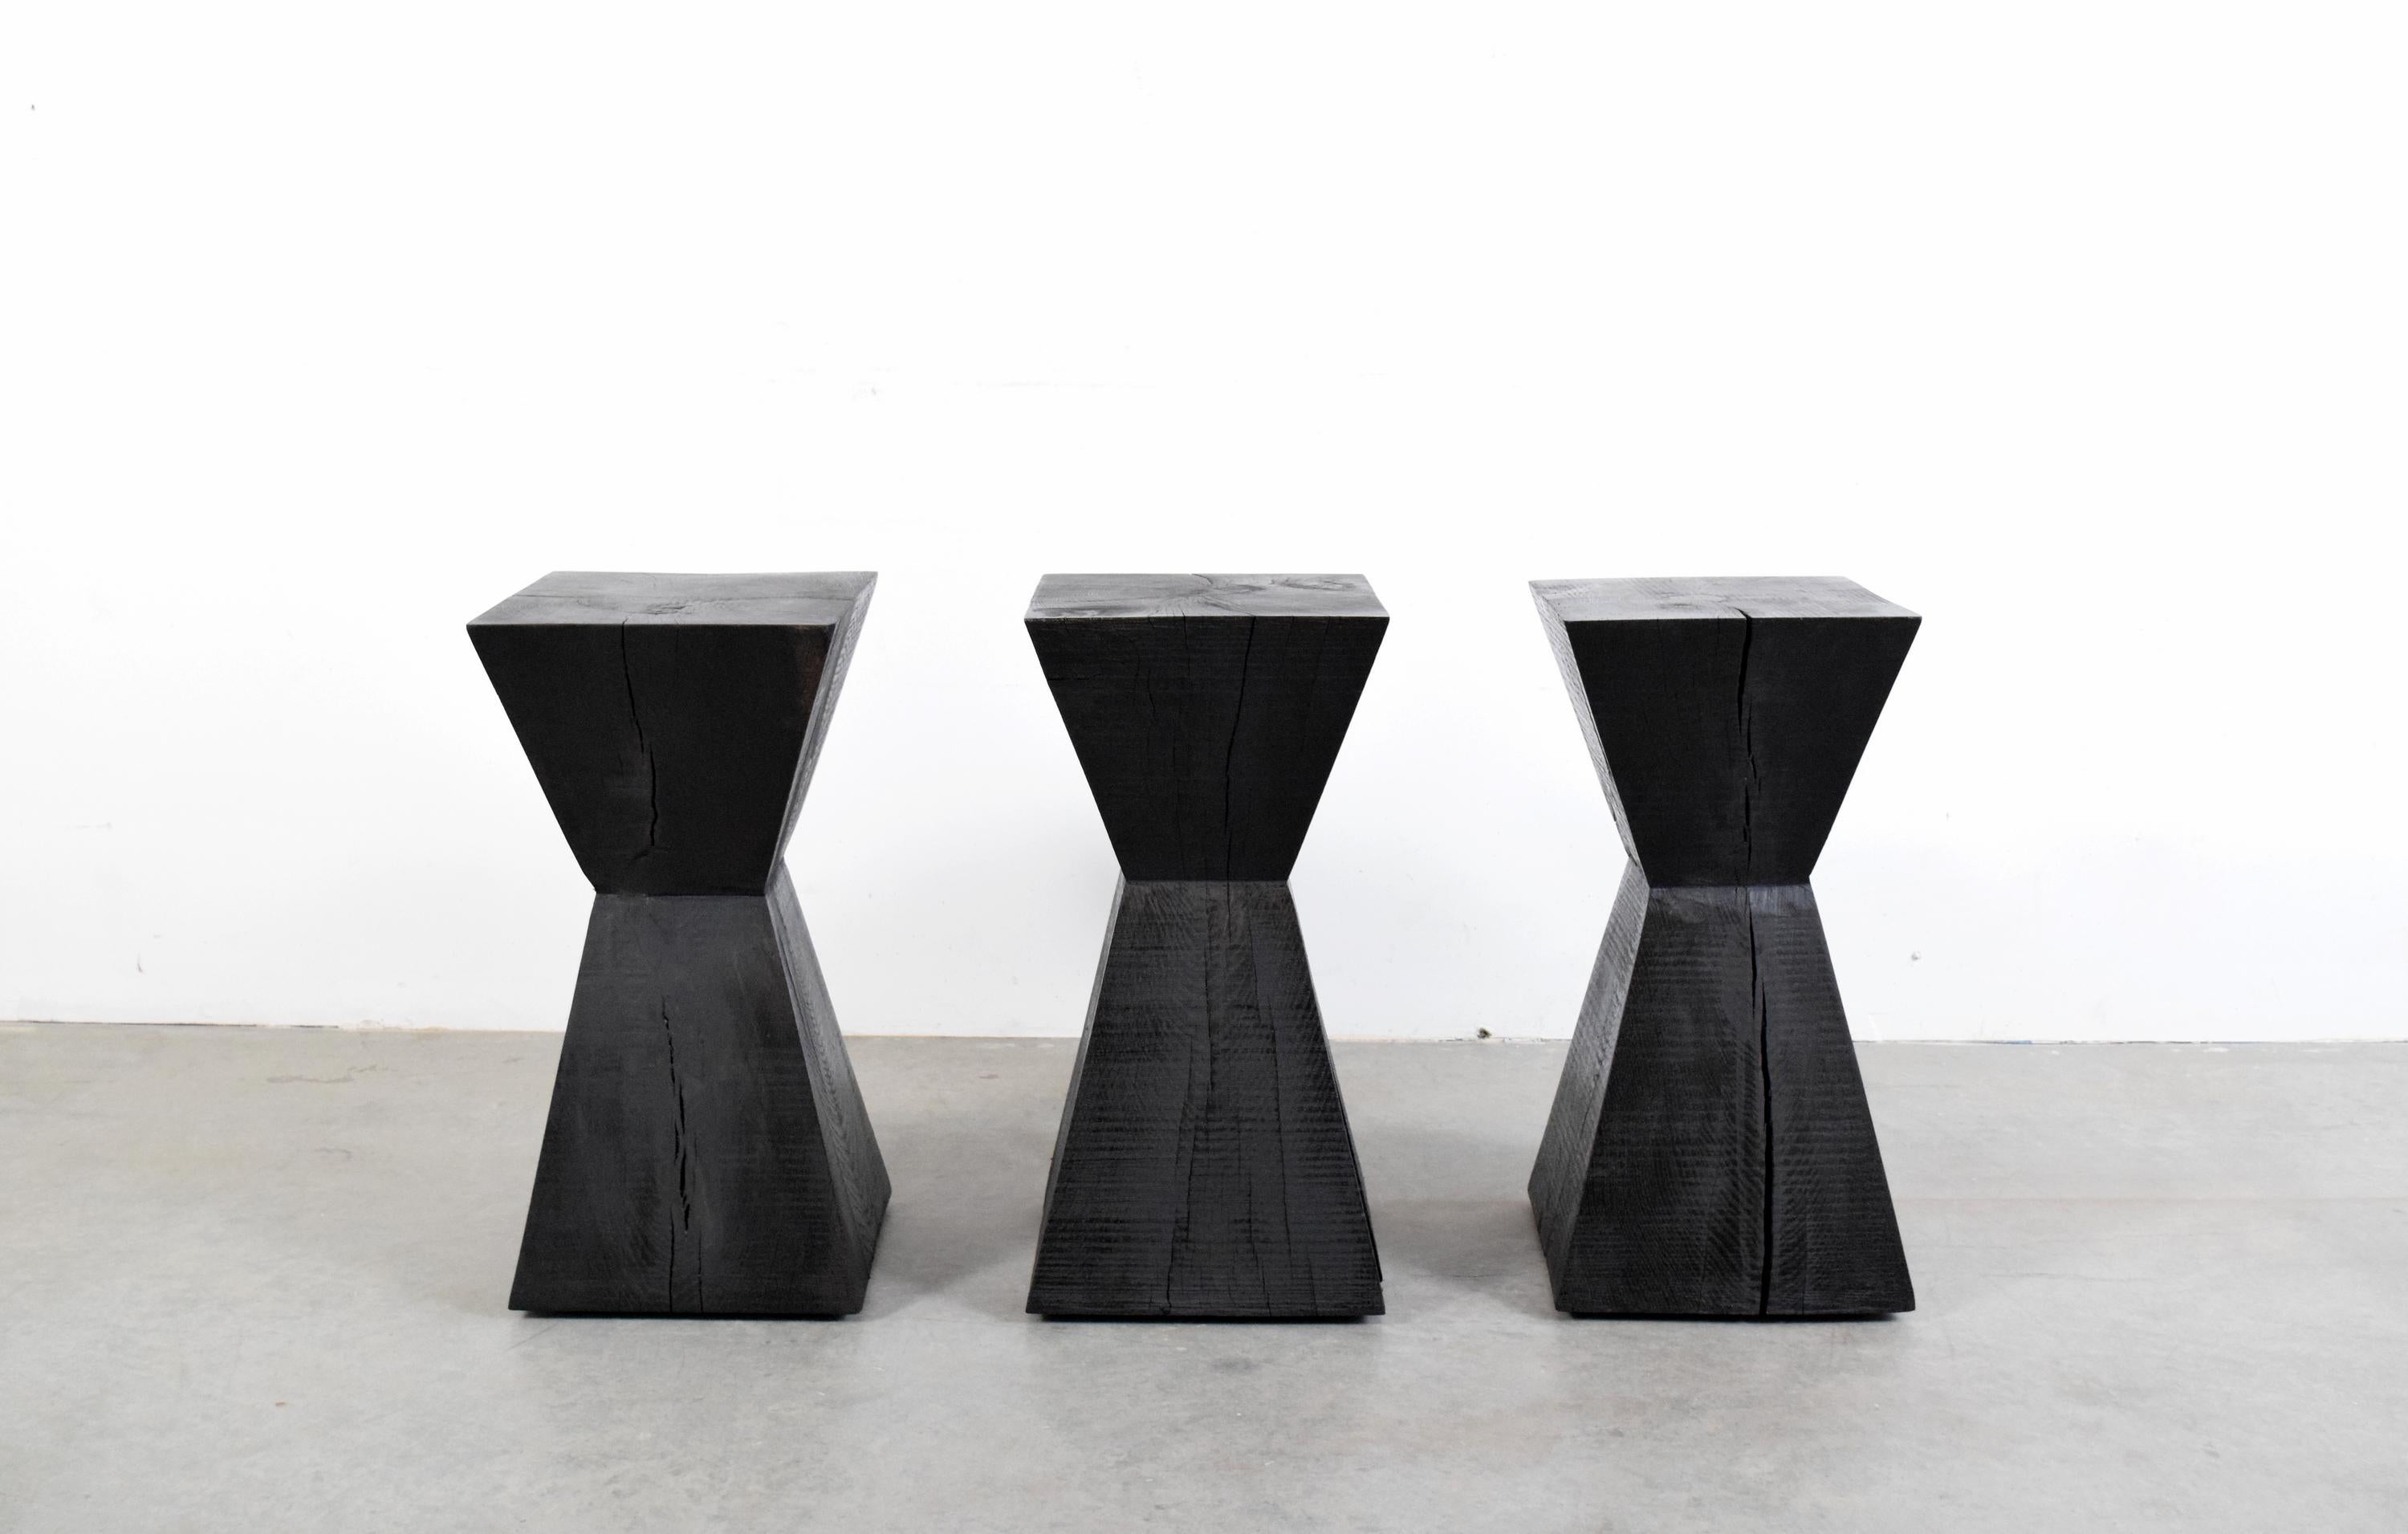 Set of three solid, ebonized, rough hewn, oak pedestal tables in the manner of French Interior Designer Christian Liaigre. Most likely produced in the late 1980s, or early 1990s, each piece is cut from a solid piece of oak, and therefore exhibit